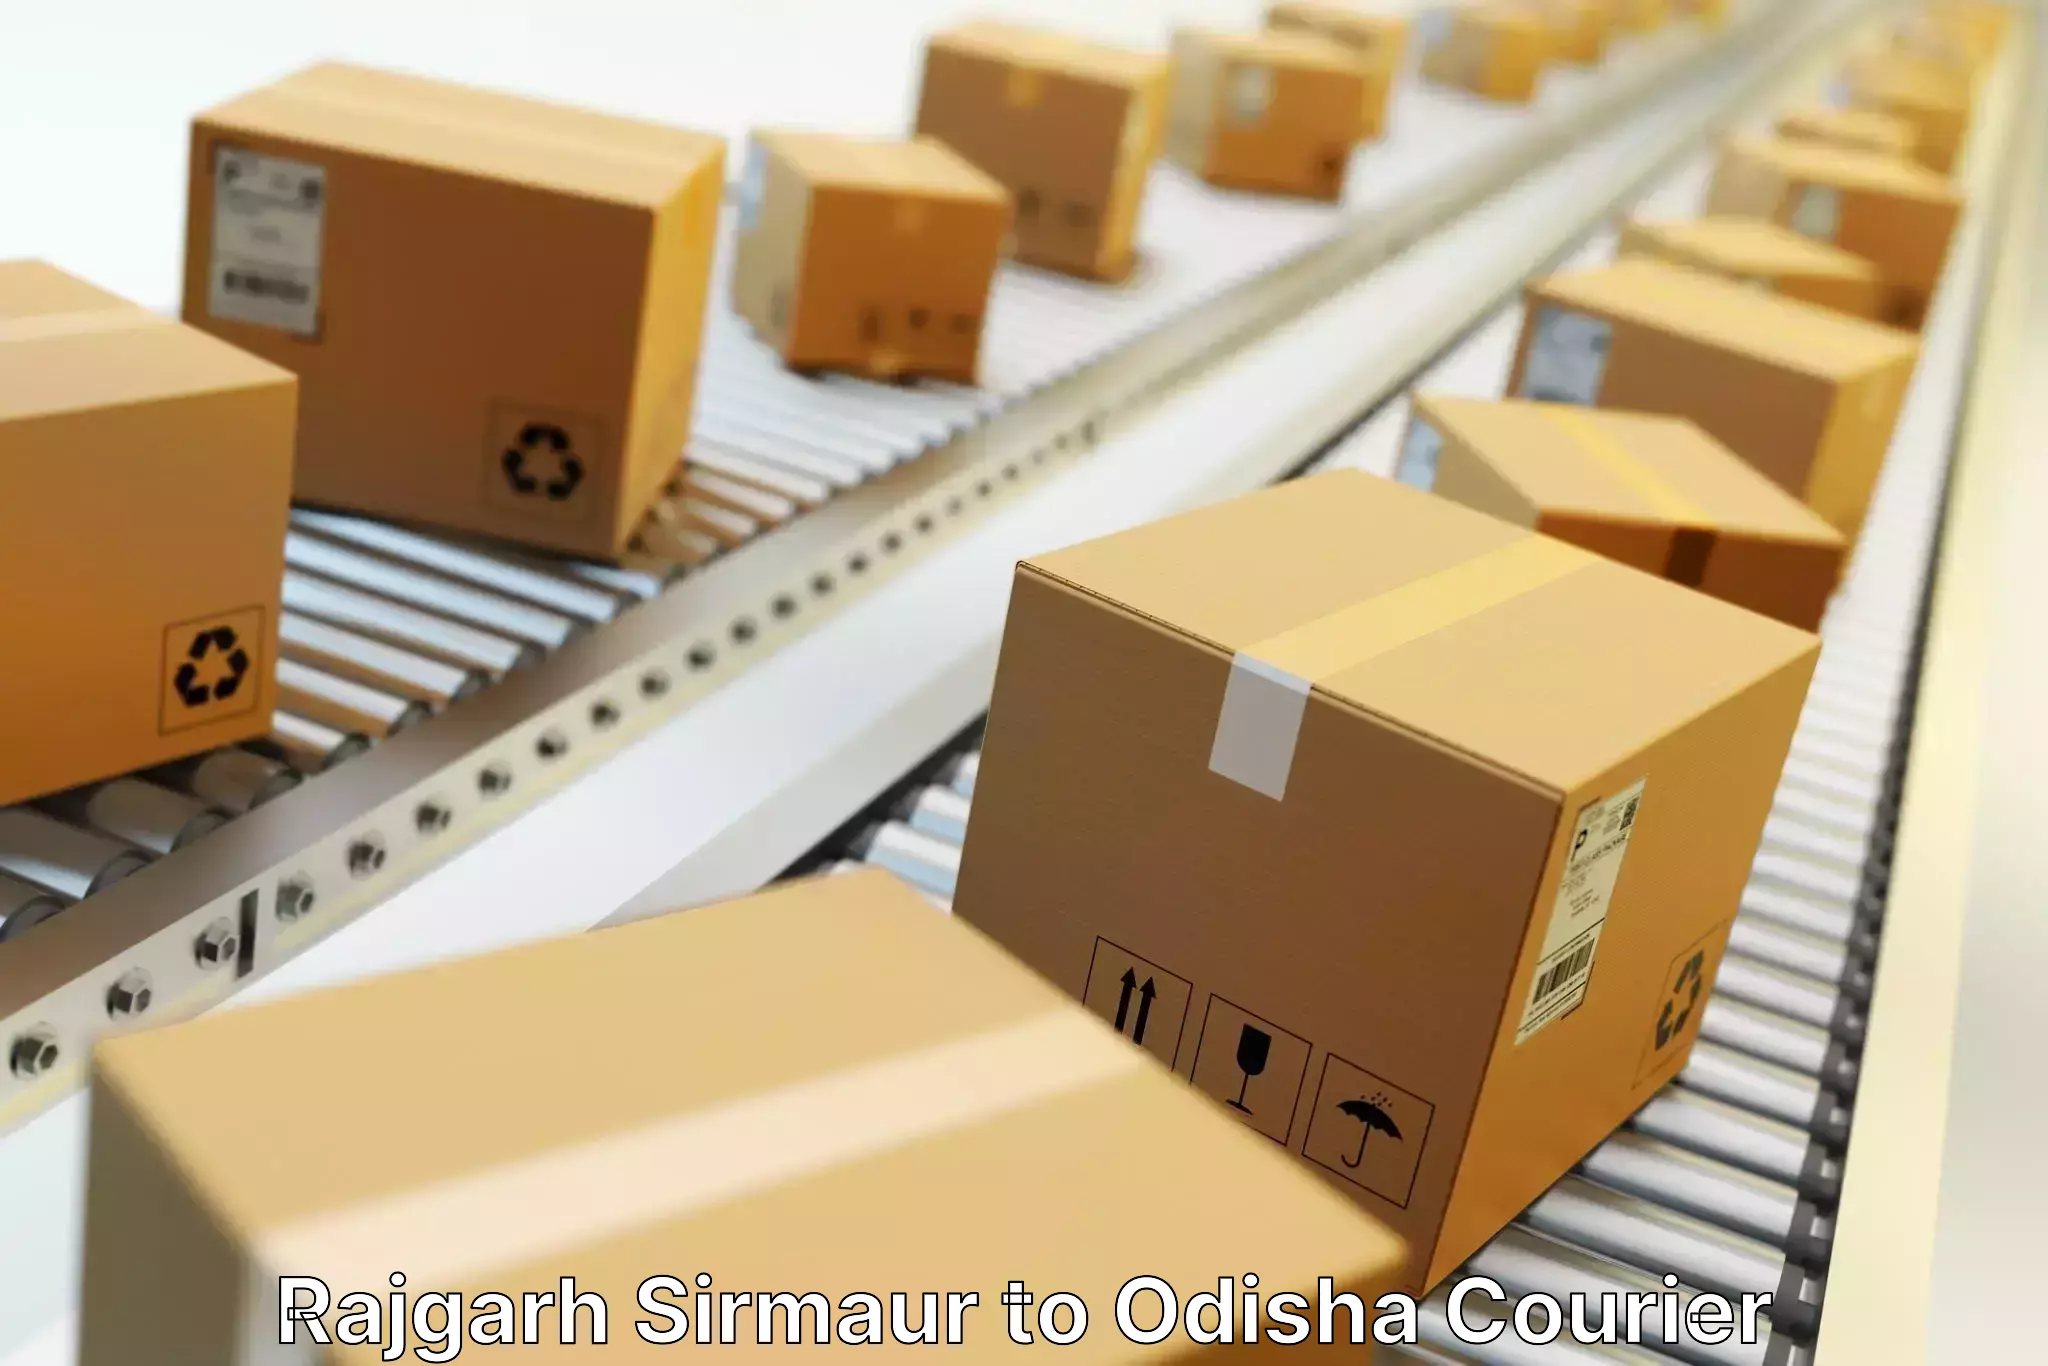 State-of-the-art courier technology Rajgarh Sirmaur to Anandapur